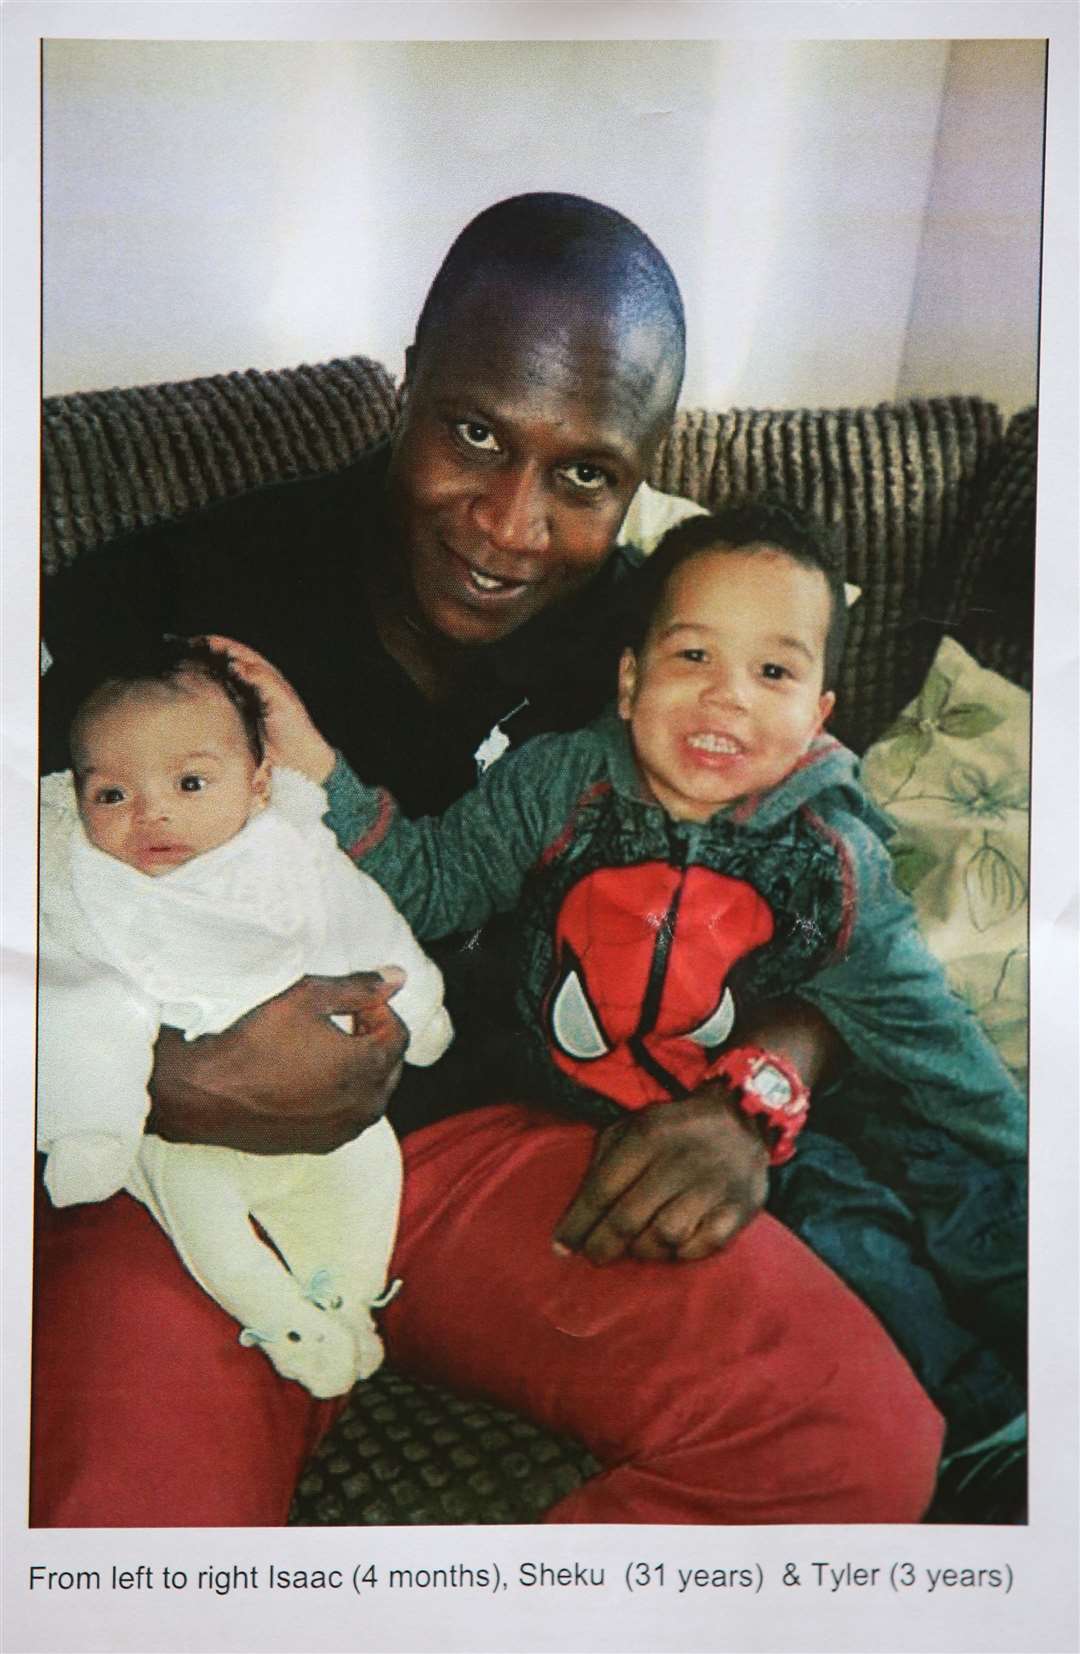 Sheku Bayoh, a father-of-two, died in 2015 after being detained by police in Fife (handout/PA)